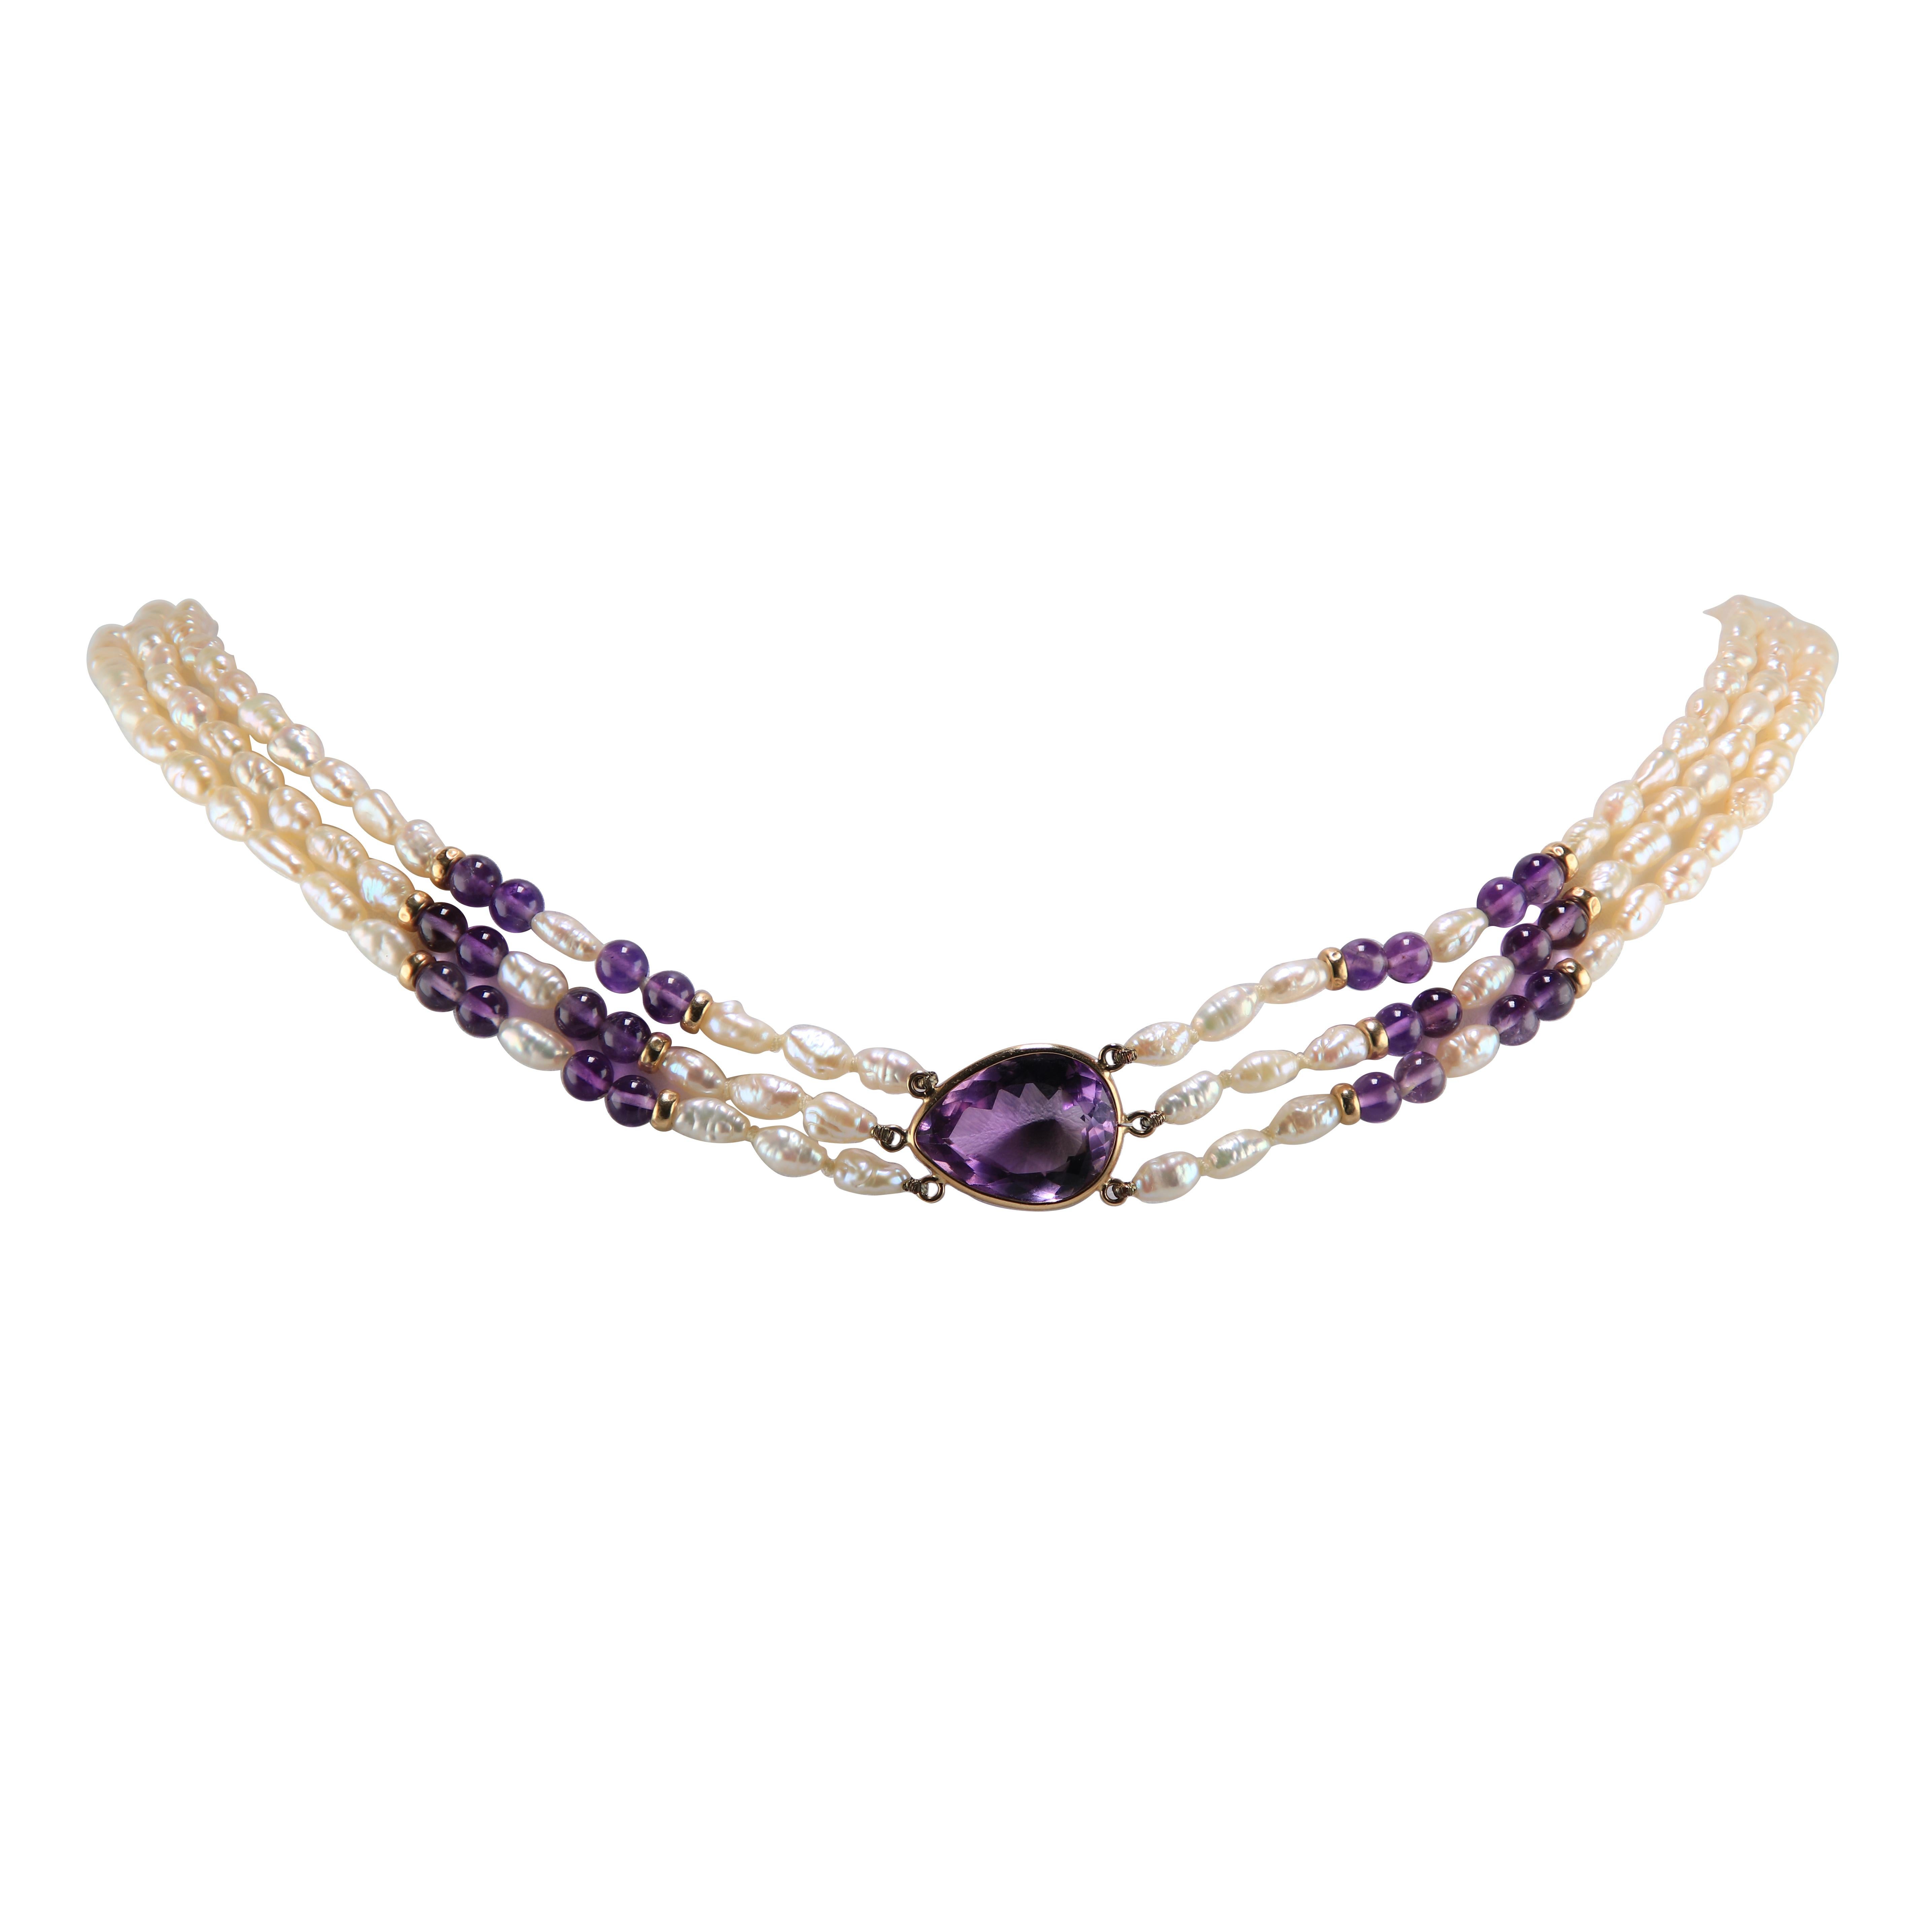 Pear Shape Amethyst 14 Karat Freshwater Seed Pearl Necklace
Sophisticated 14k gold Amethyst necklace with three strands of baroque freshwater seed pearls. This necklace has a pear shape 20 mm x 16 mm Amethyst as the main amulet of the piece. The